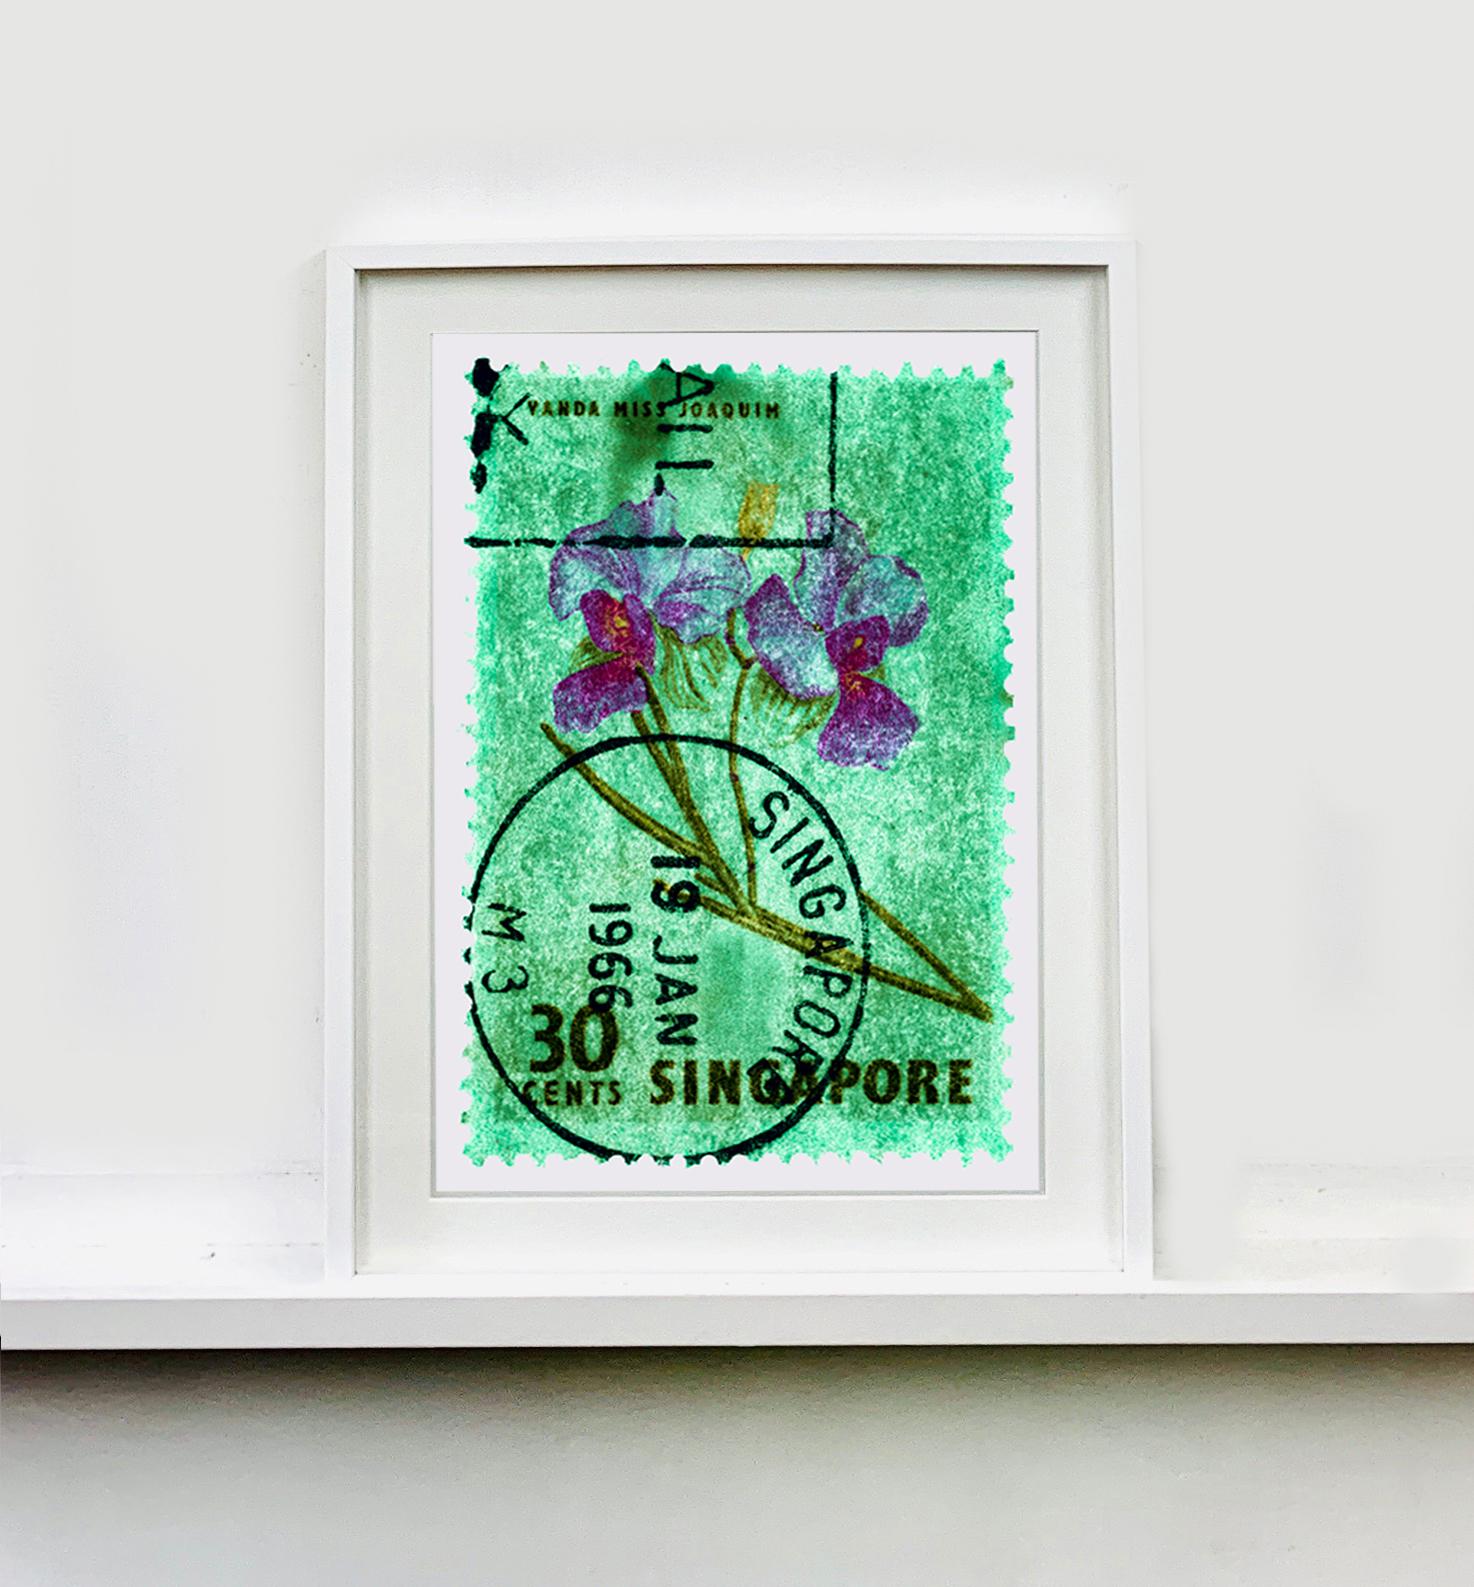 Singapore Stamp Collection, 30c Singapore Orchid Green - Floral color photo For Sale 3